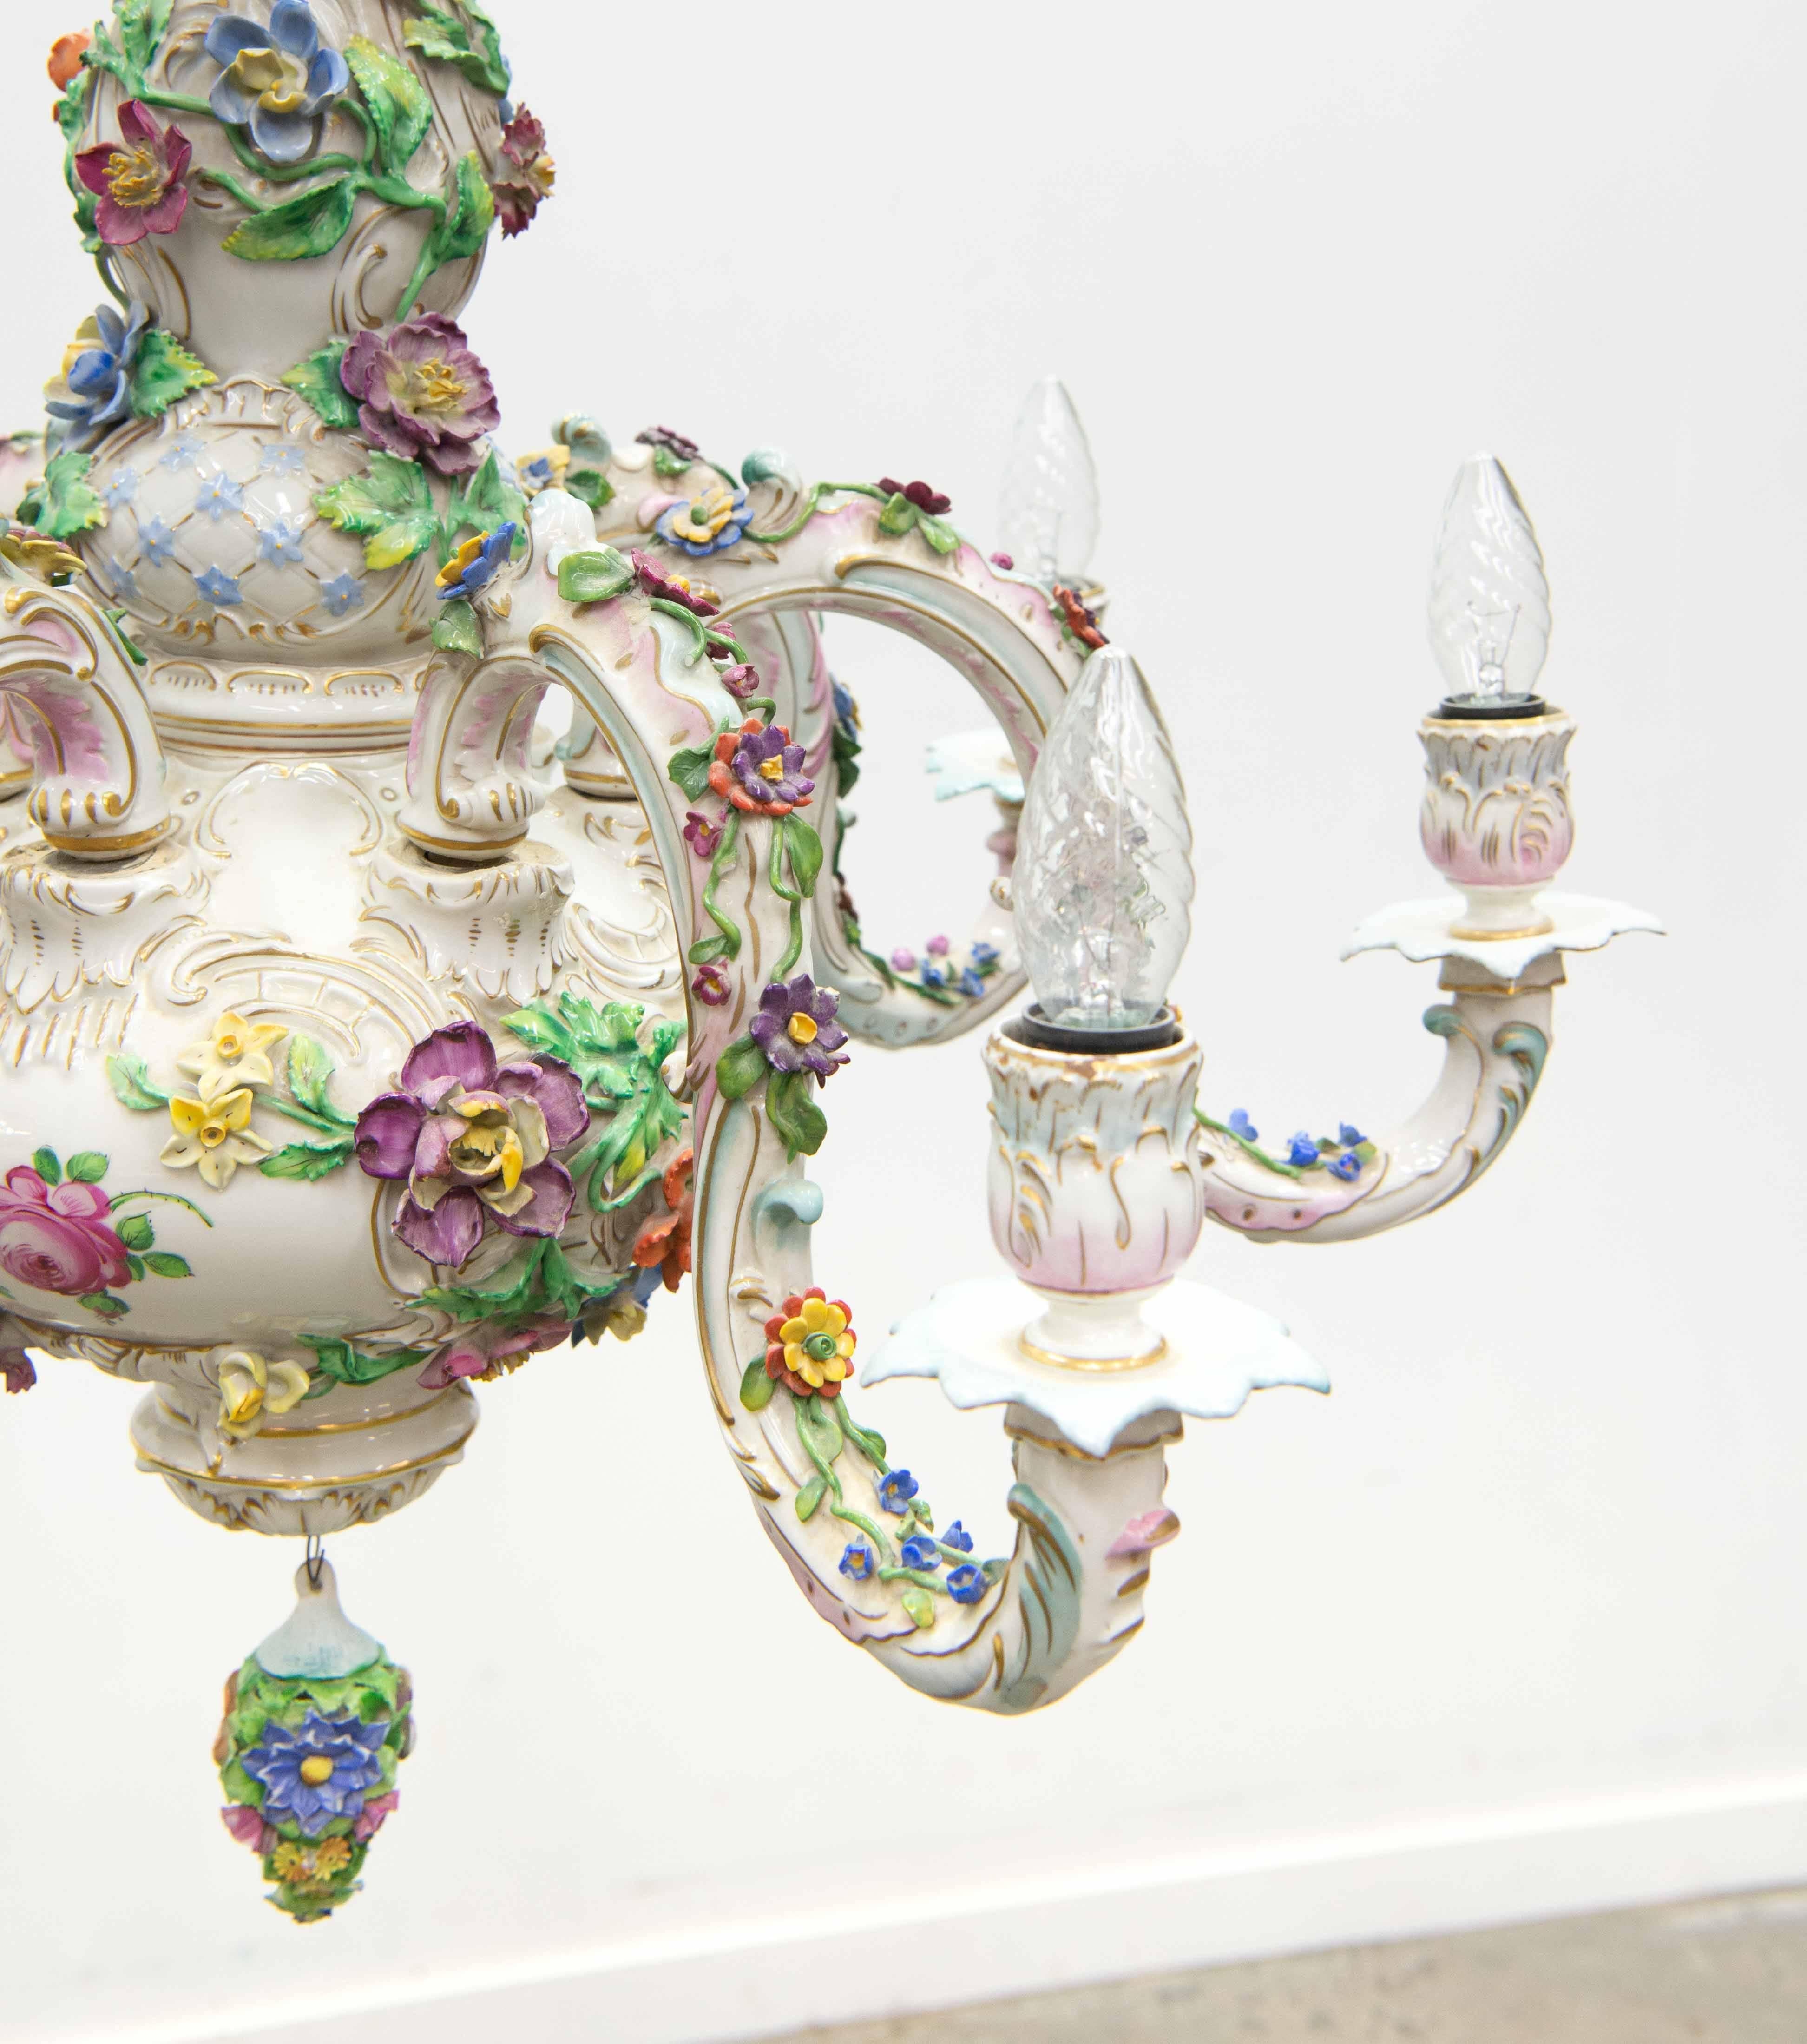 Porcelain chandelier by Dresden Porcelain in Germany. Made circa 1970. 
Six points of light. Porcelain ceiling cover included. 
Light damage on some of the smaller flowers because of cleaning. Overall good condition. 

Please note: This